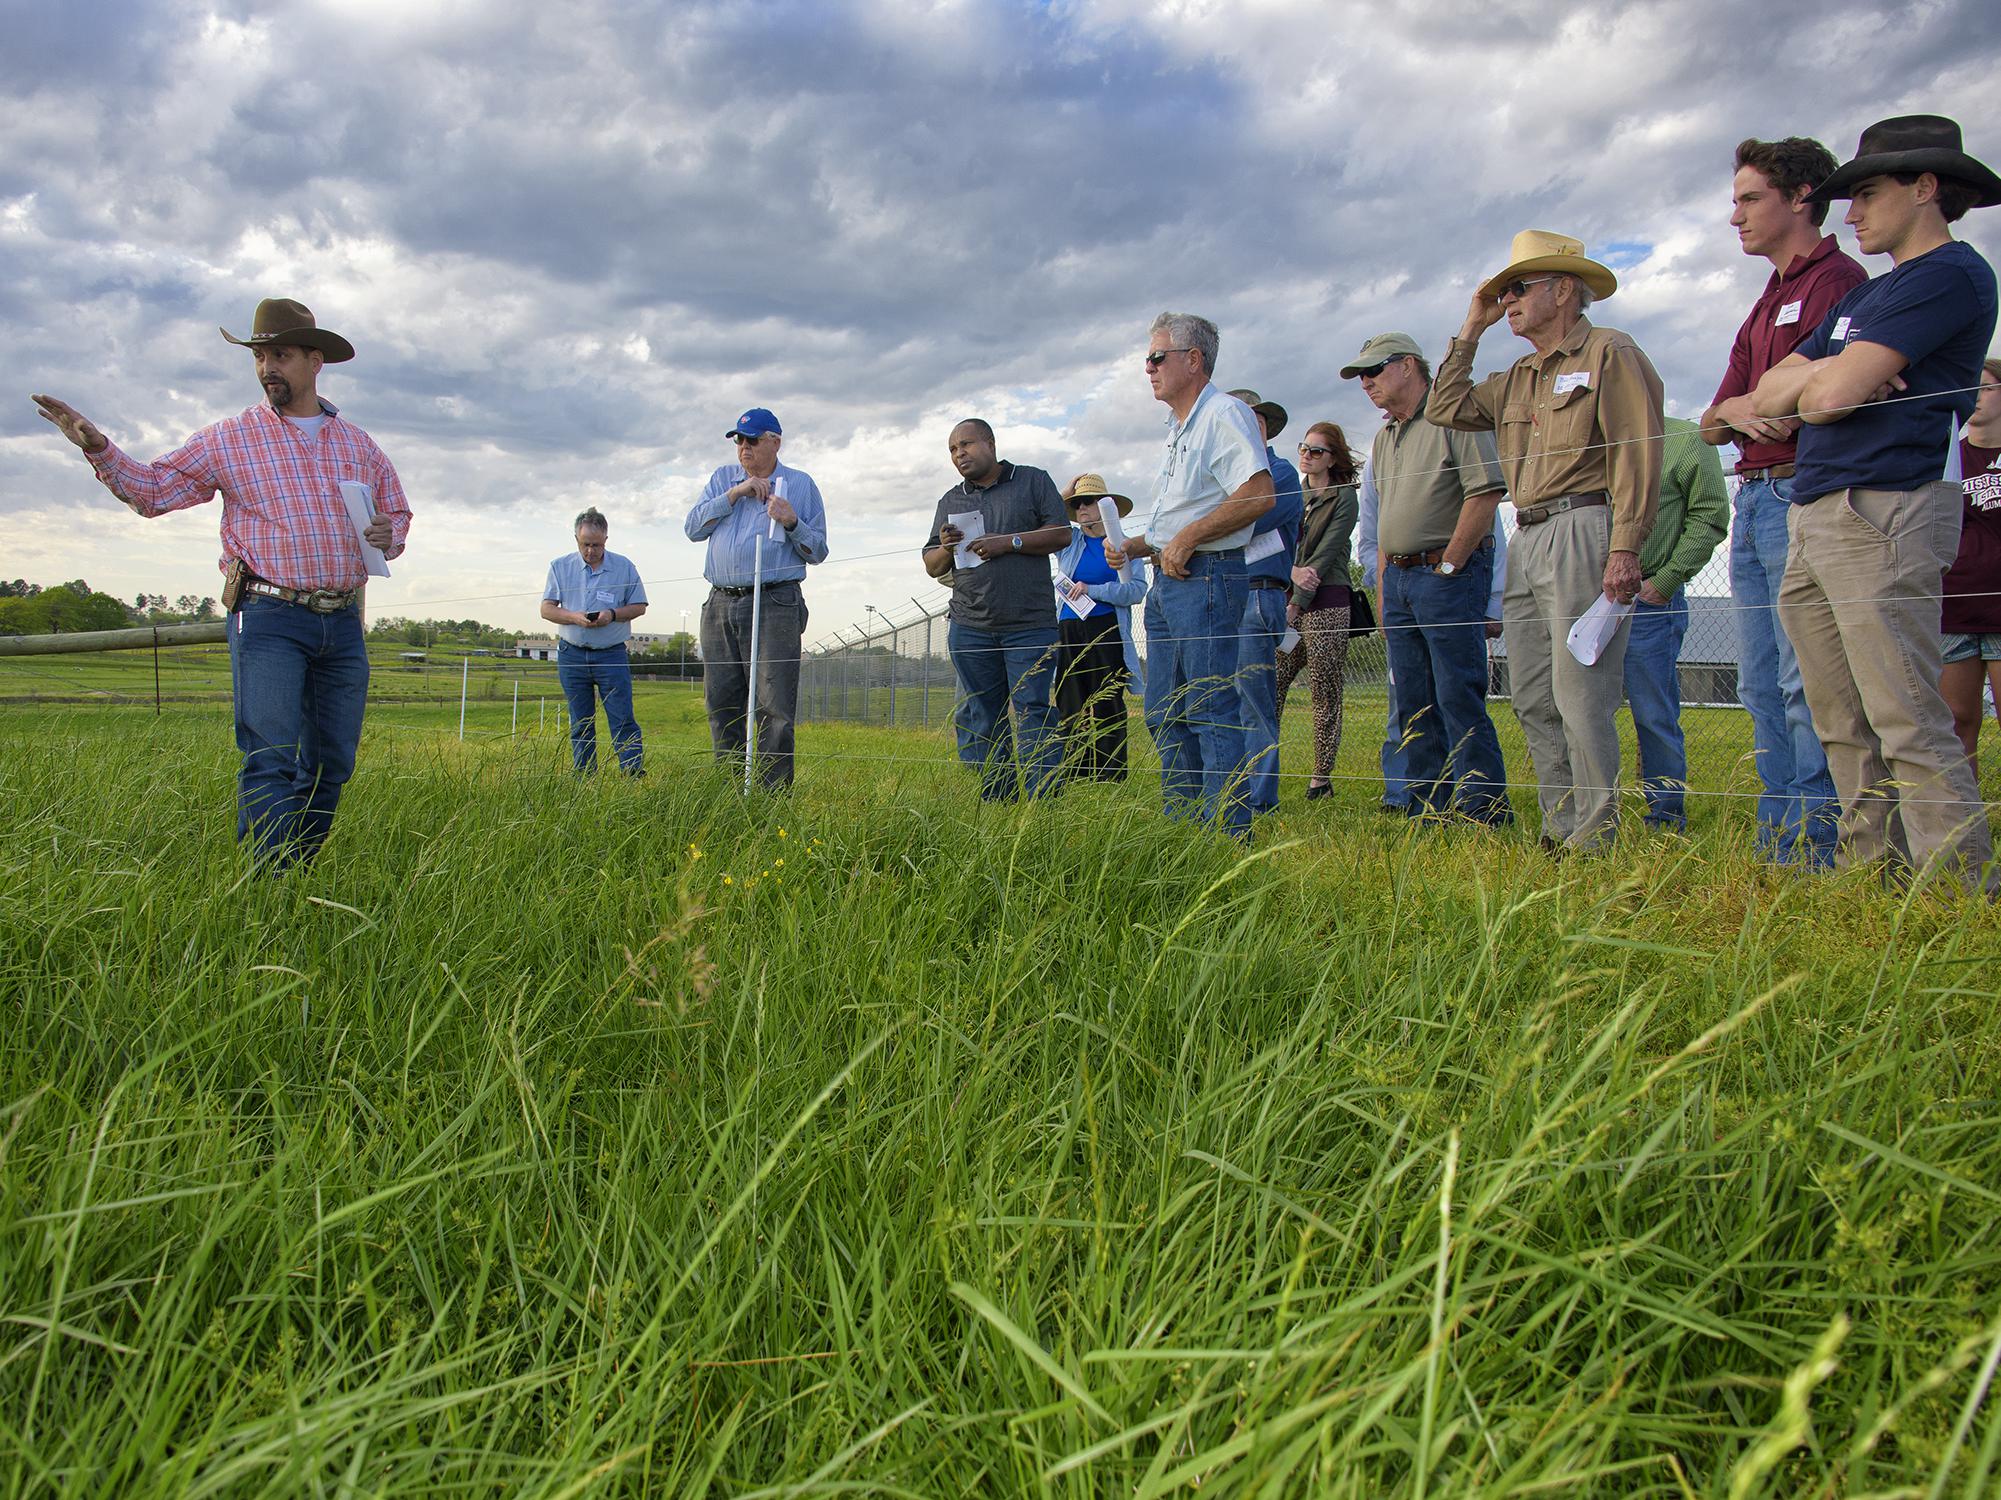 Rocky Lemus (left), forage specialist with the Mississippi State University Extension Service, explains successes and challenges with fescue growing at the H.H. Leveck Animal Research Center. Lemus led tours during a Forage Field Day near Starkville, Mississippi, on April 7, 2016. (Photo by MSU Extension Service/Kevin Hudson)